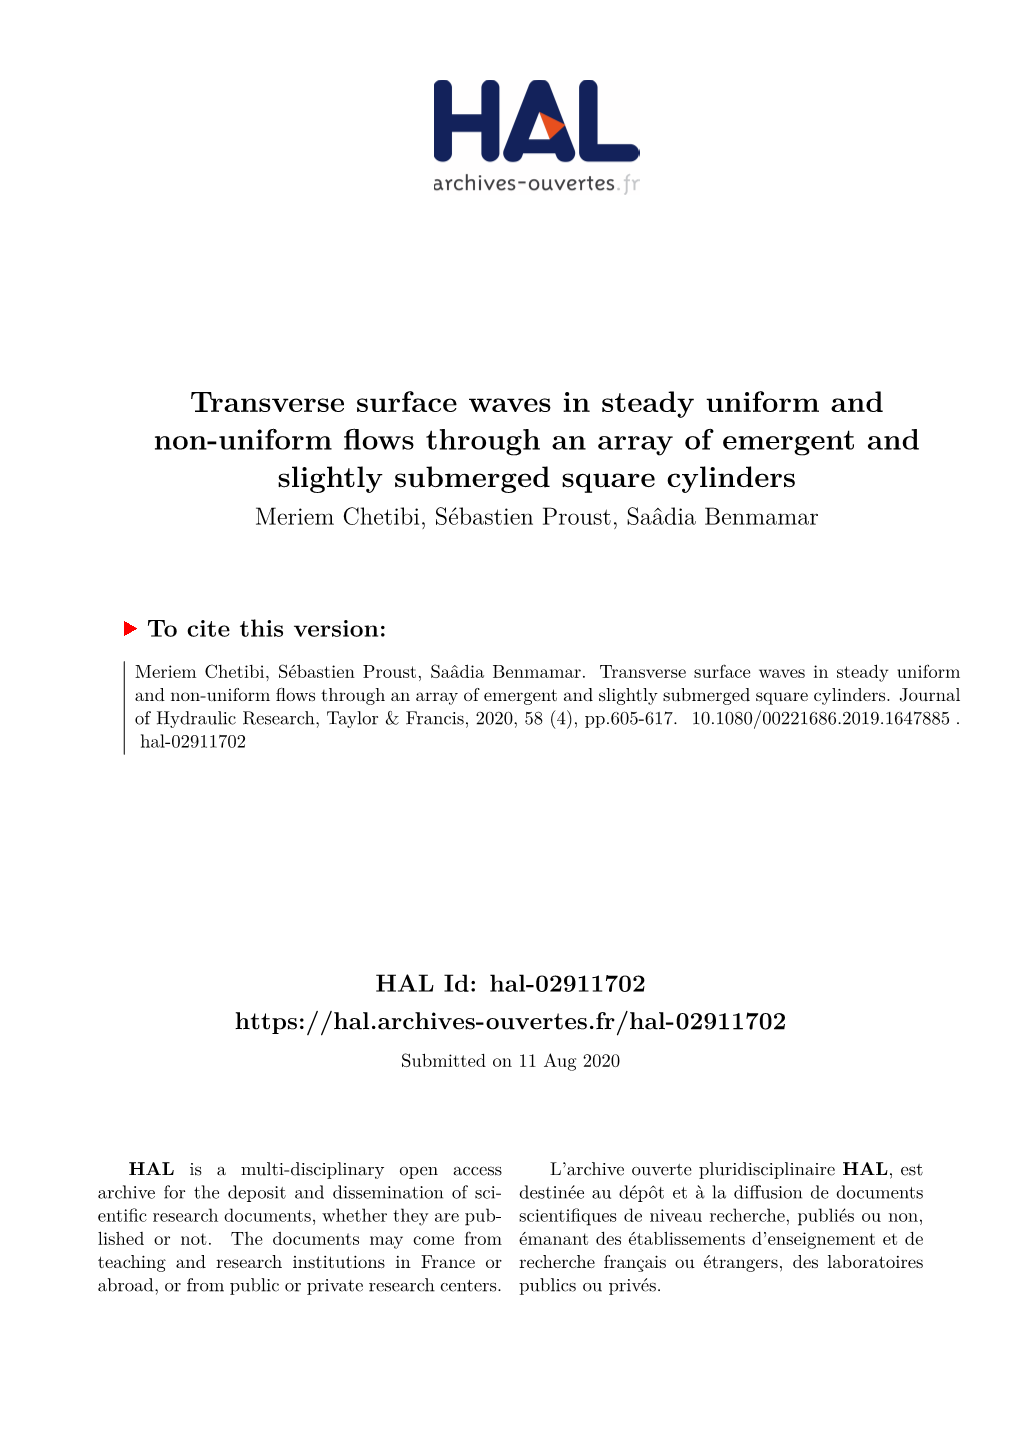 Transverse Surface Waves in Steady Uniform and Non-Uniform Flows